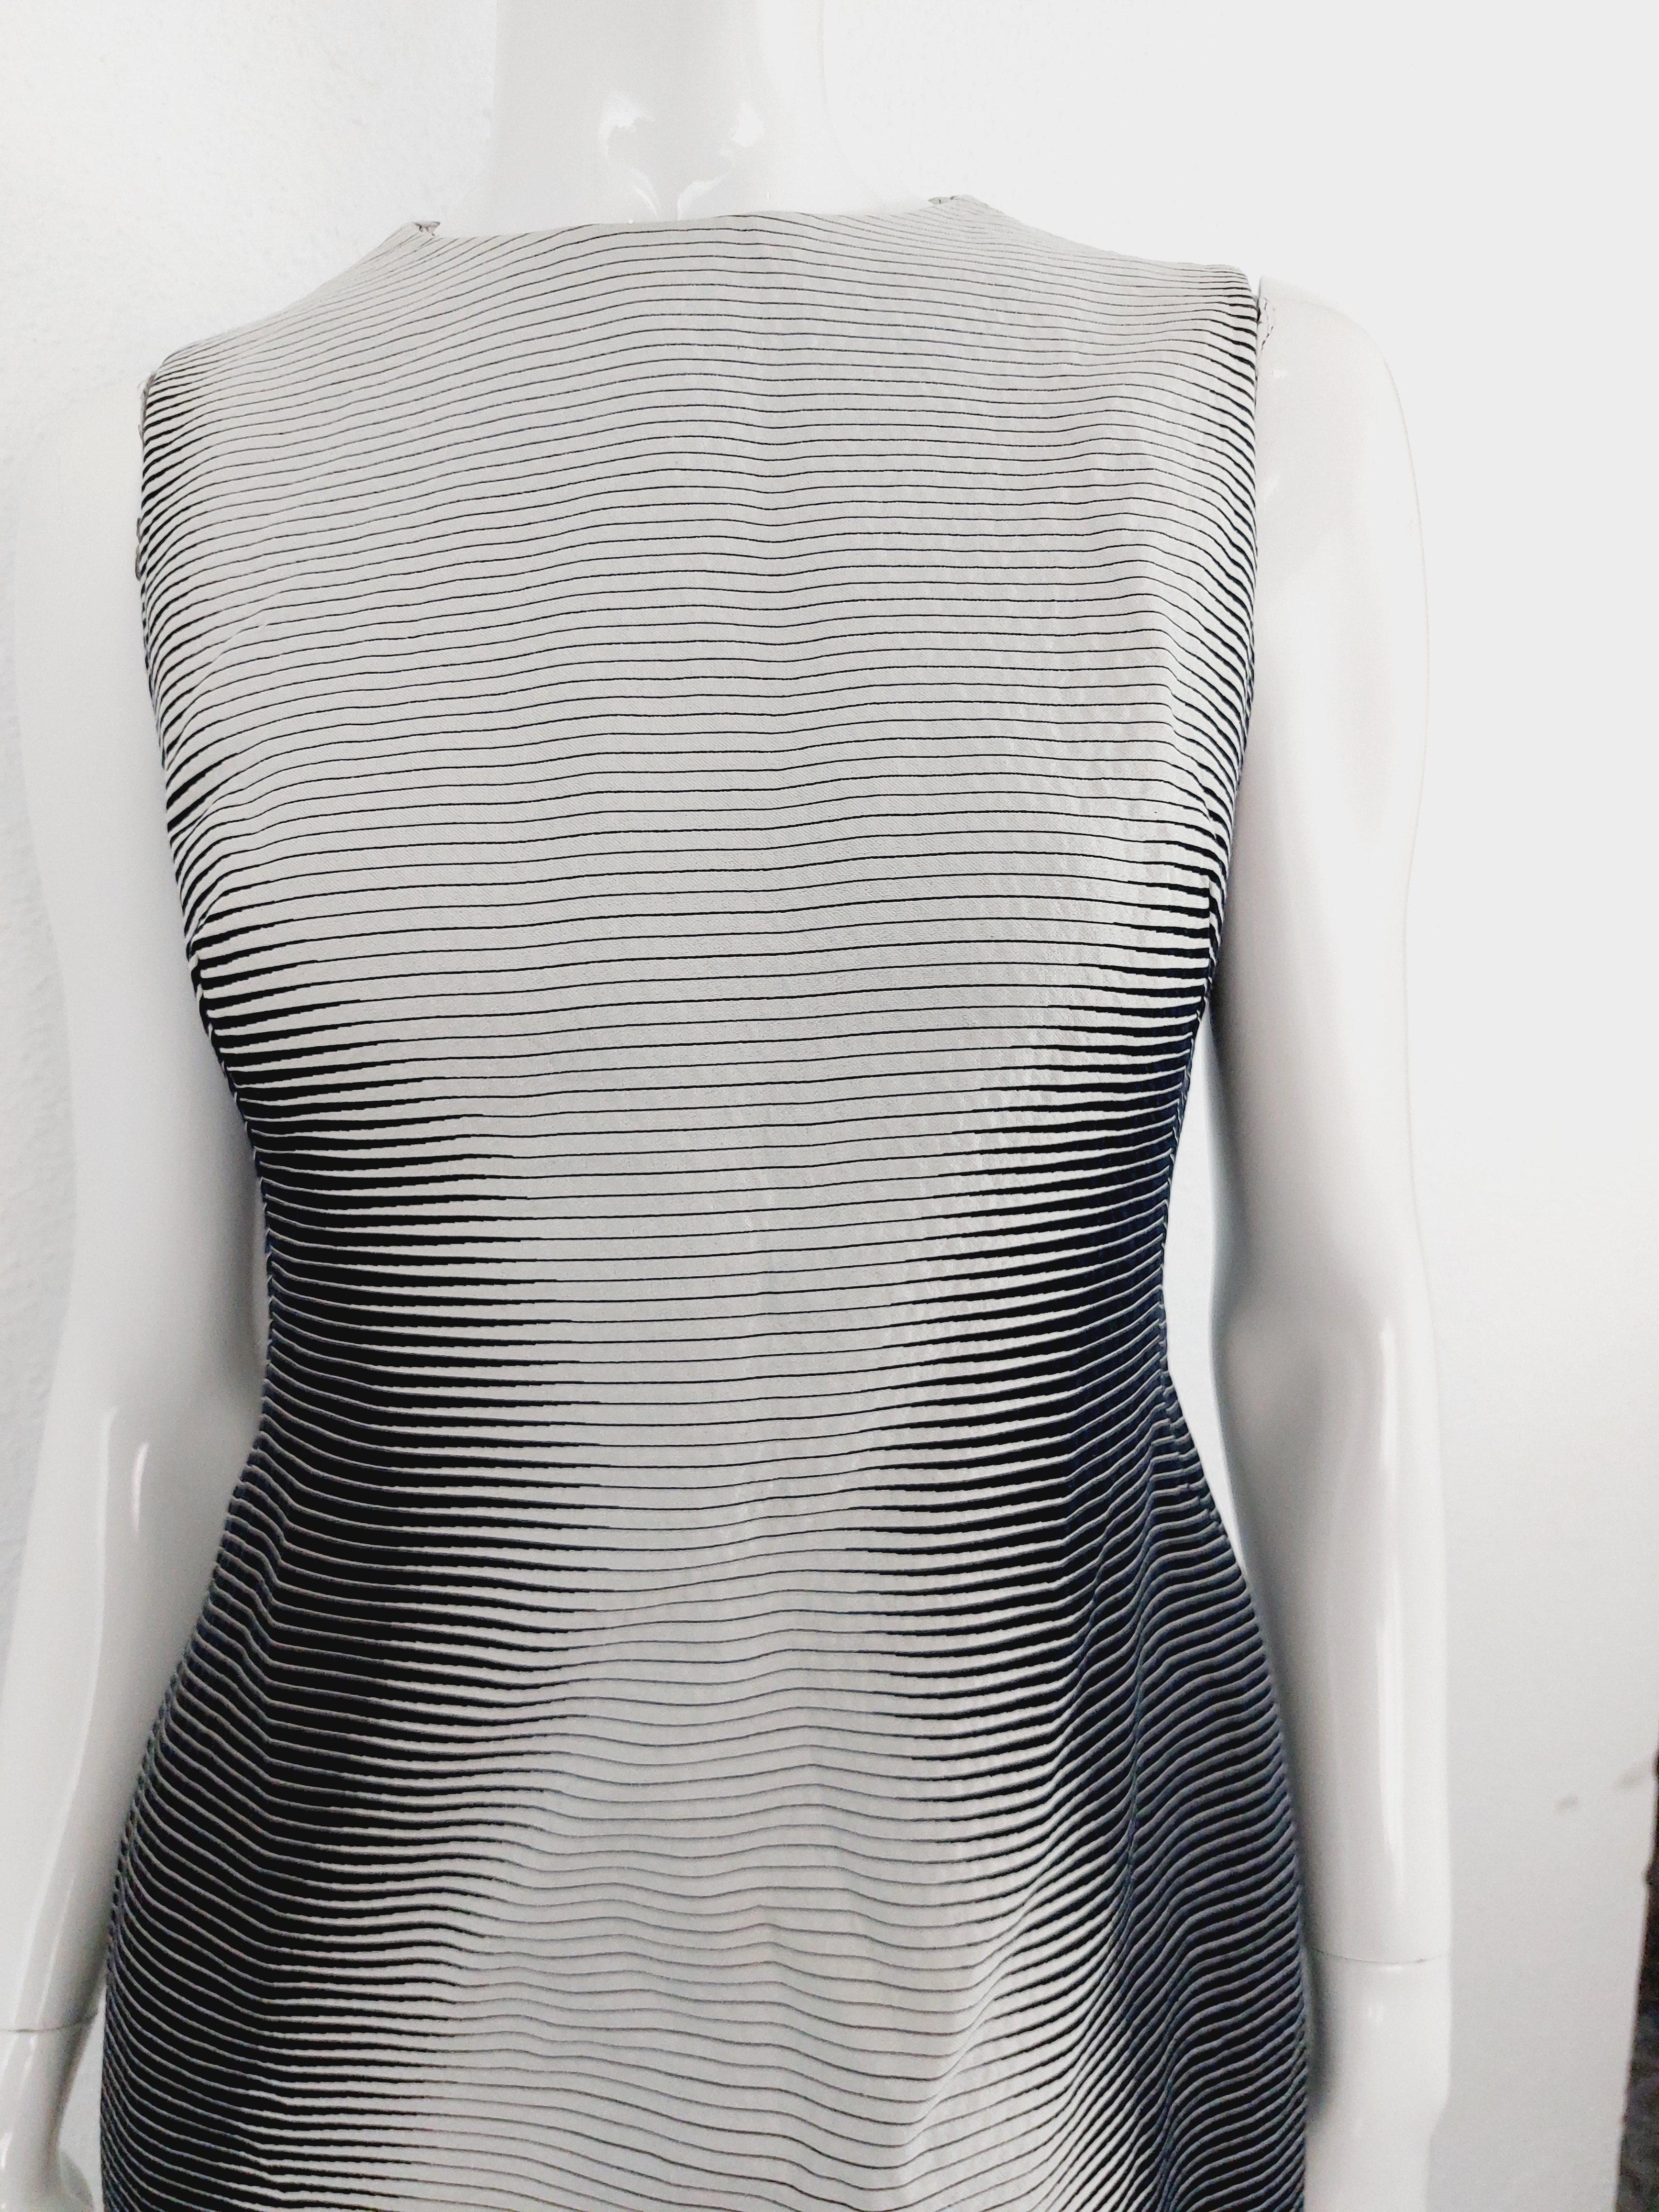 Alexander Mcqueen Optical Illusion Striped Runway Resort Collection 2009 Dress For Sale 7